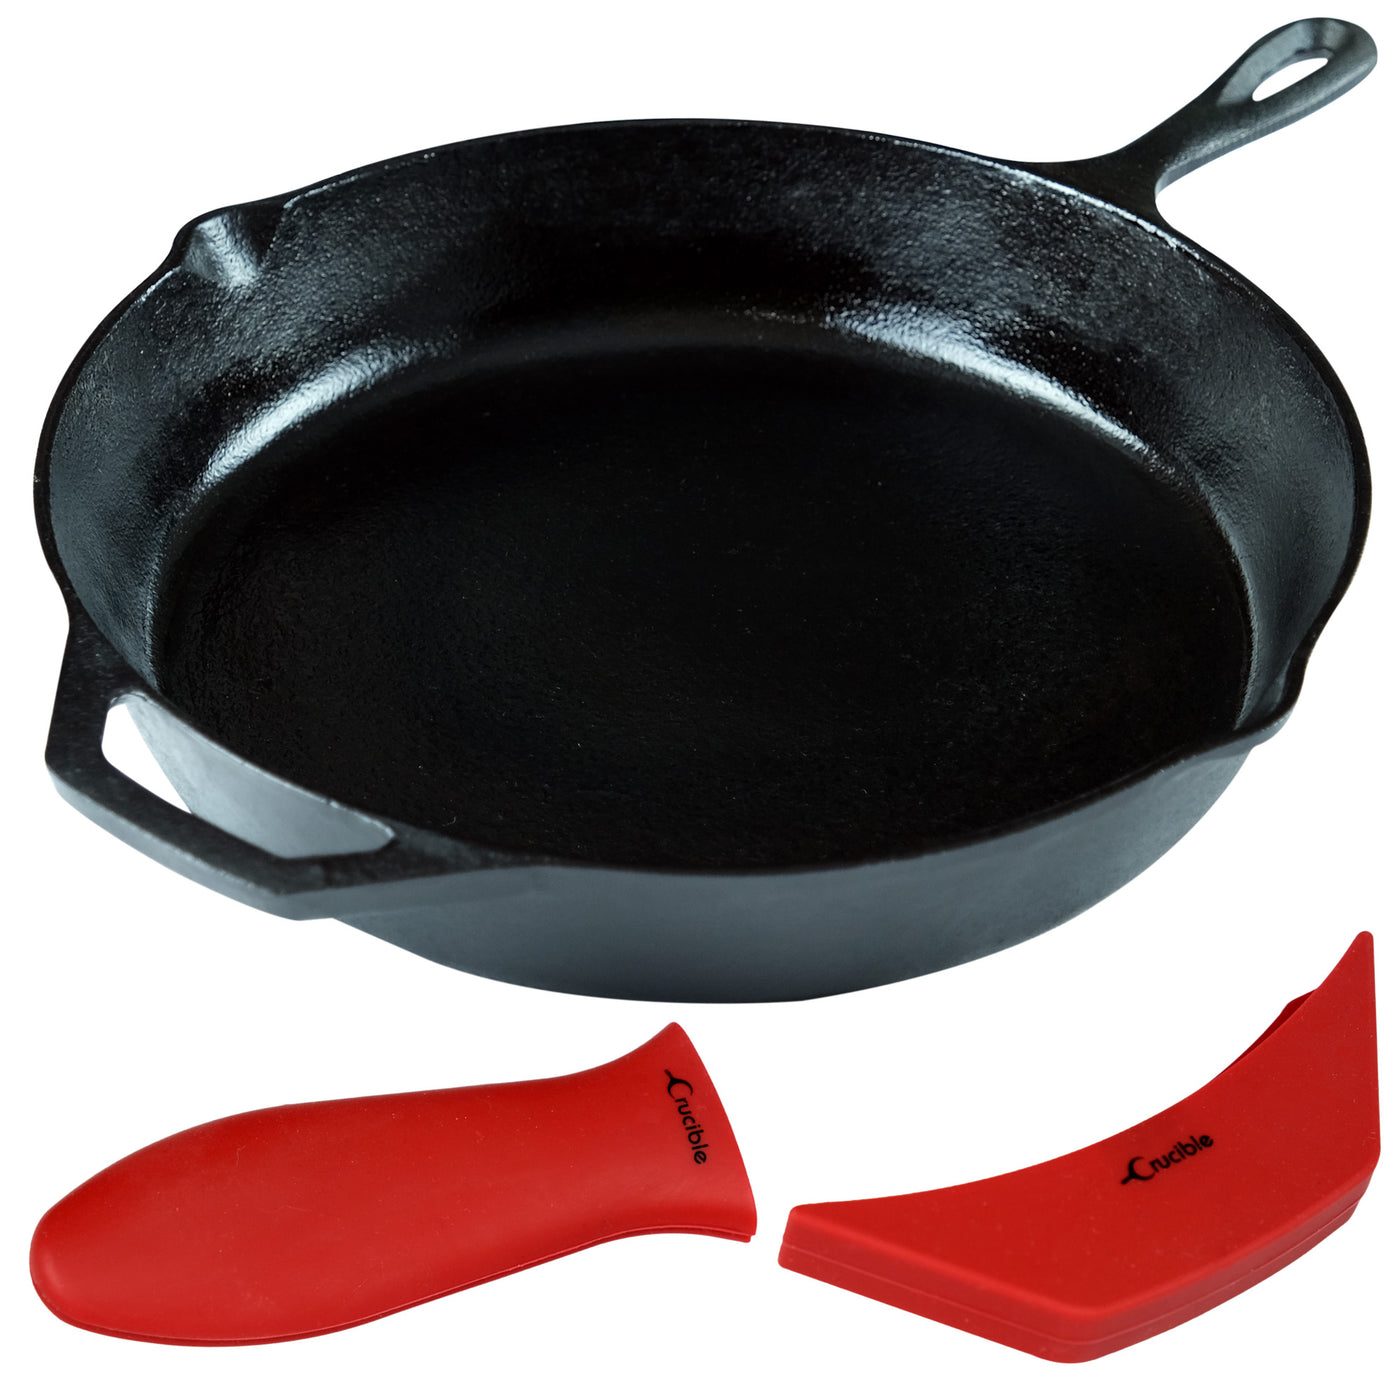 Lodge 12 in. Cast Iron Skillet with Silicone Handle Holder